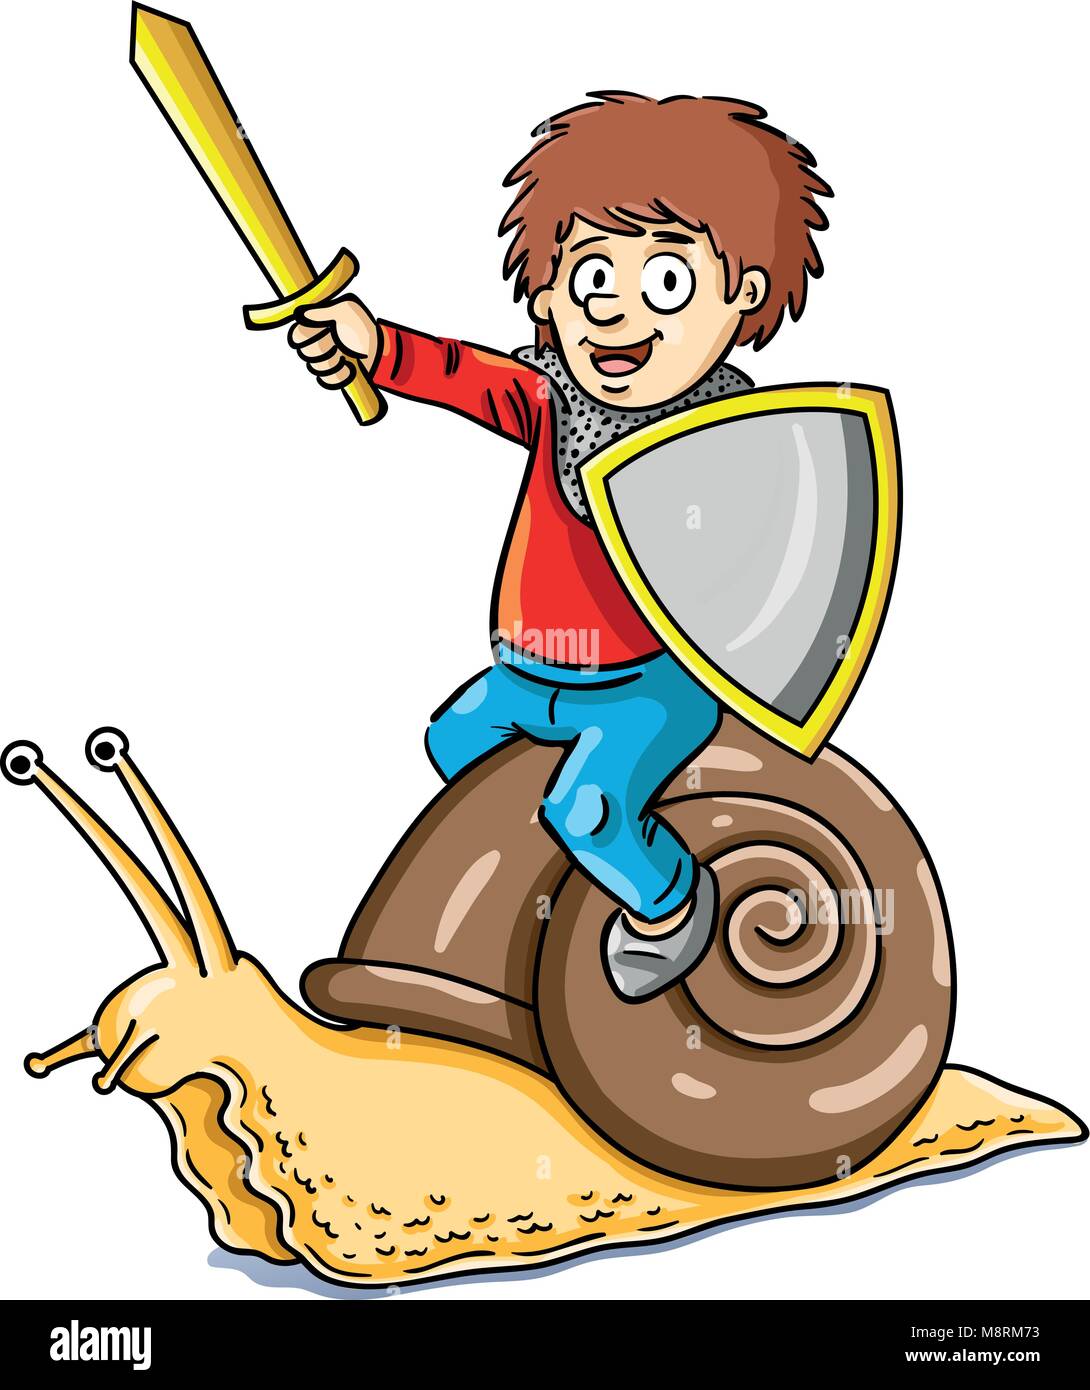 Funny vector illustration of child as a knight mounted on a conch snail. Stock Vector